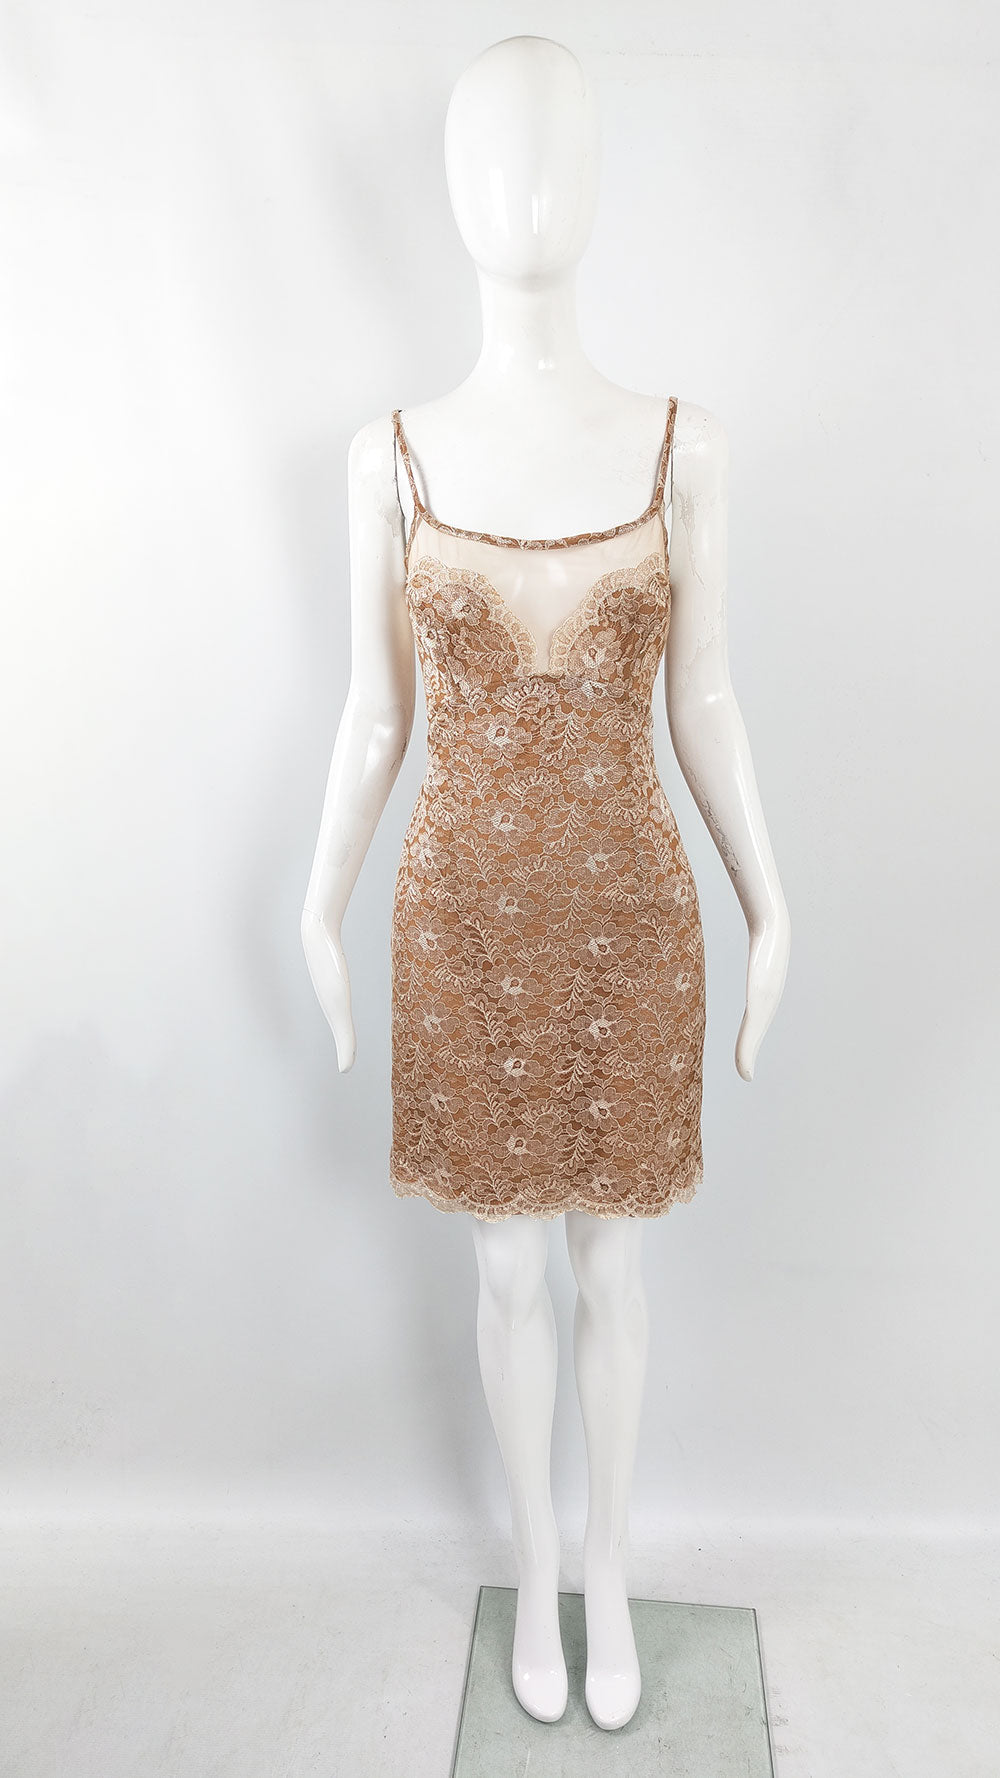 A sexy vintage y2k dress by Jiki of Monte Carlo in a tan chiffon with a lace overlay and a mini, sleeveless design.